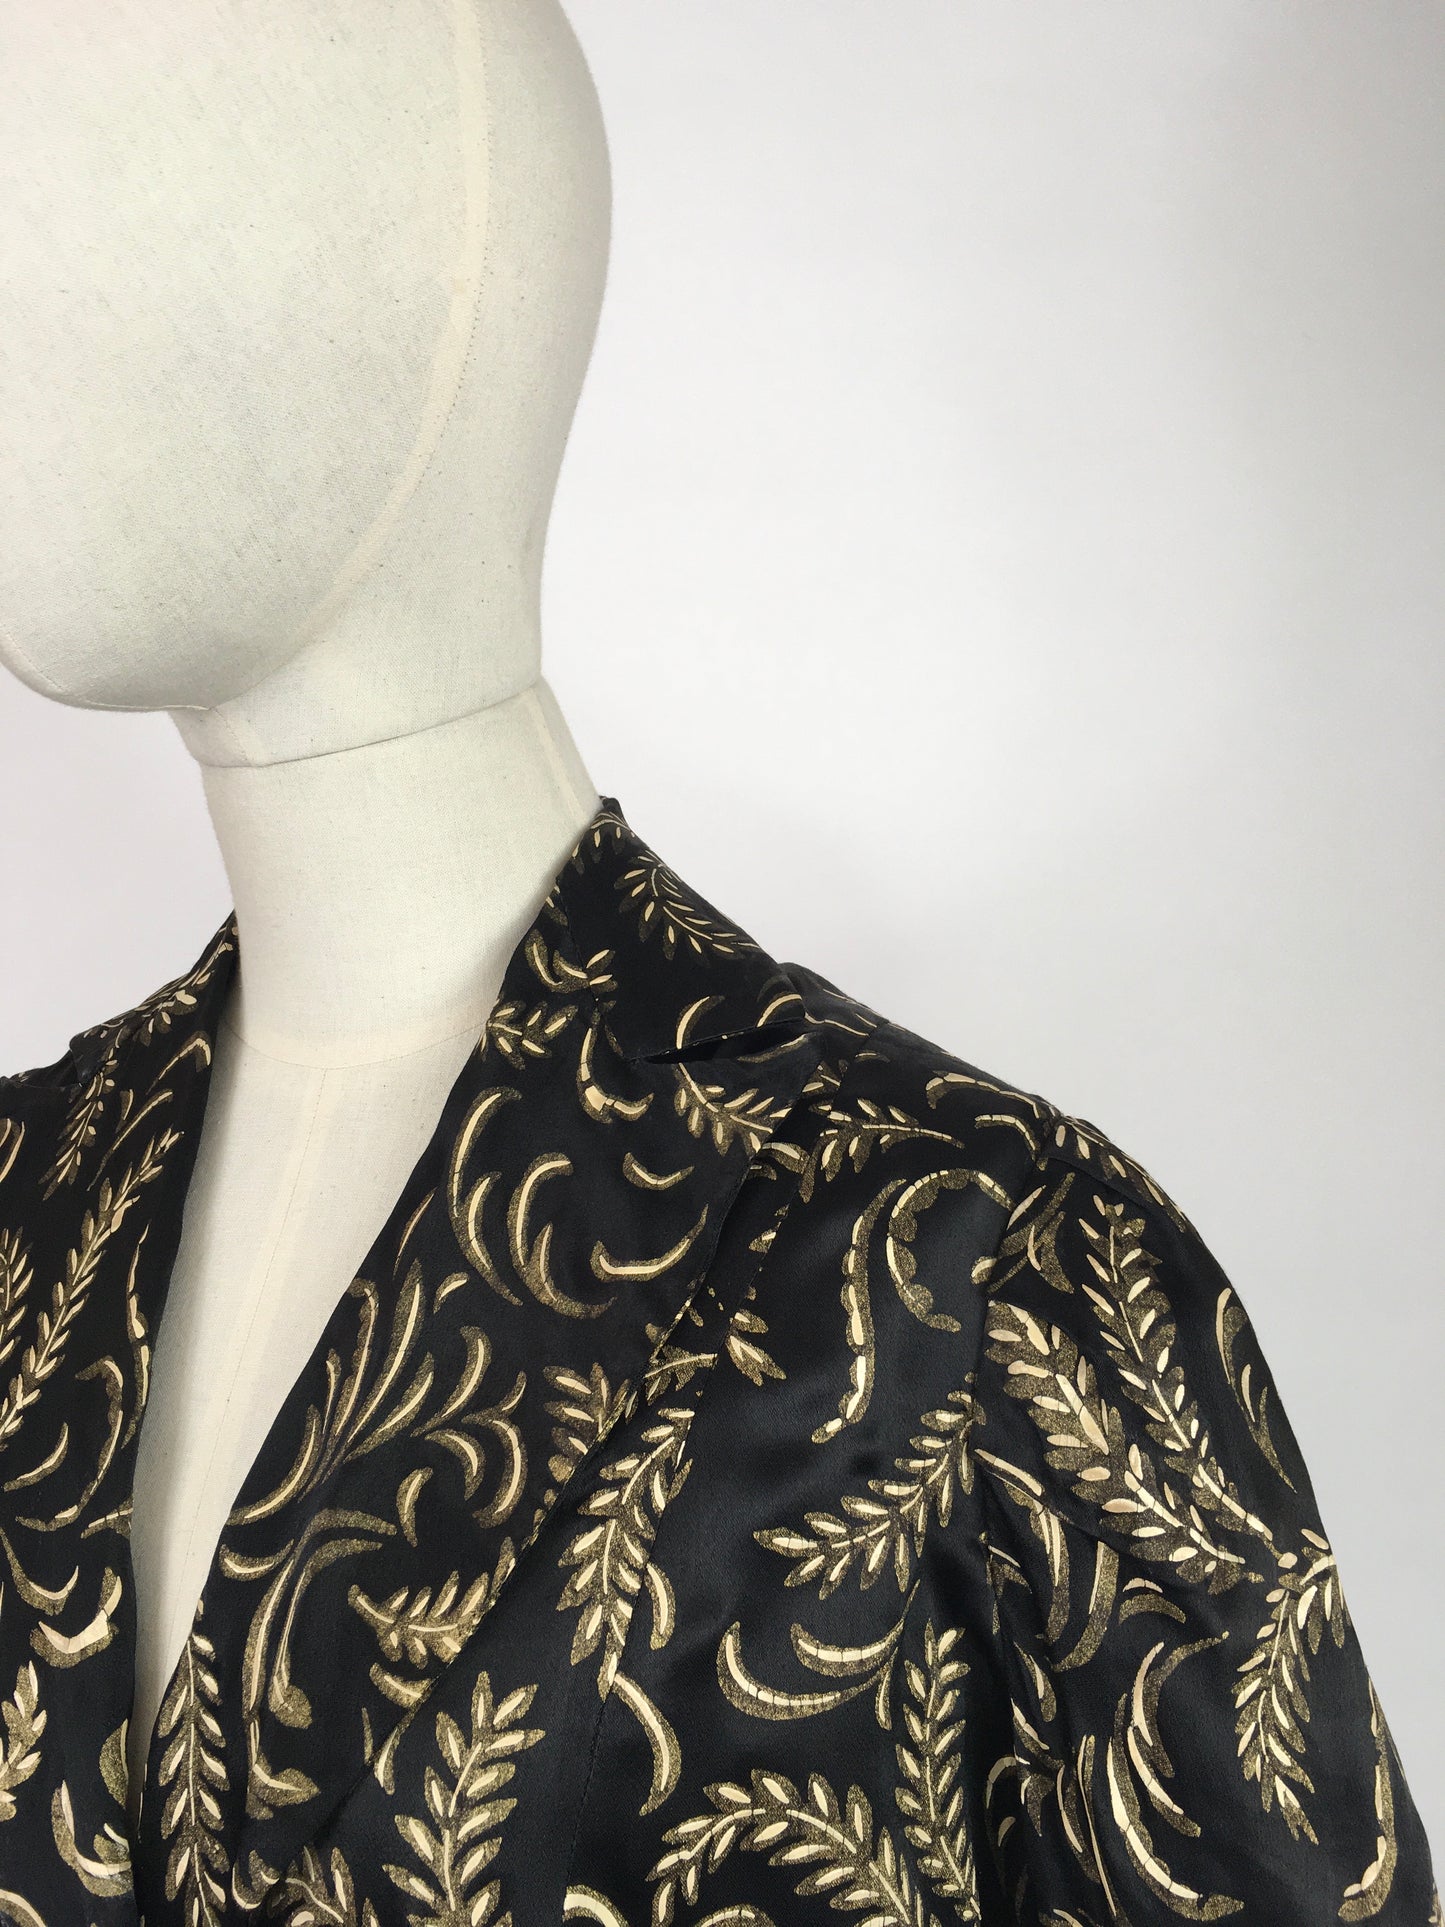 Original 1930s Exquisite Evening Jacket - In a Beautiful Handpainted Silk in a Scrollwork Design in Tones Of Gold